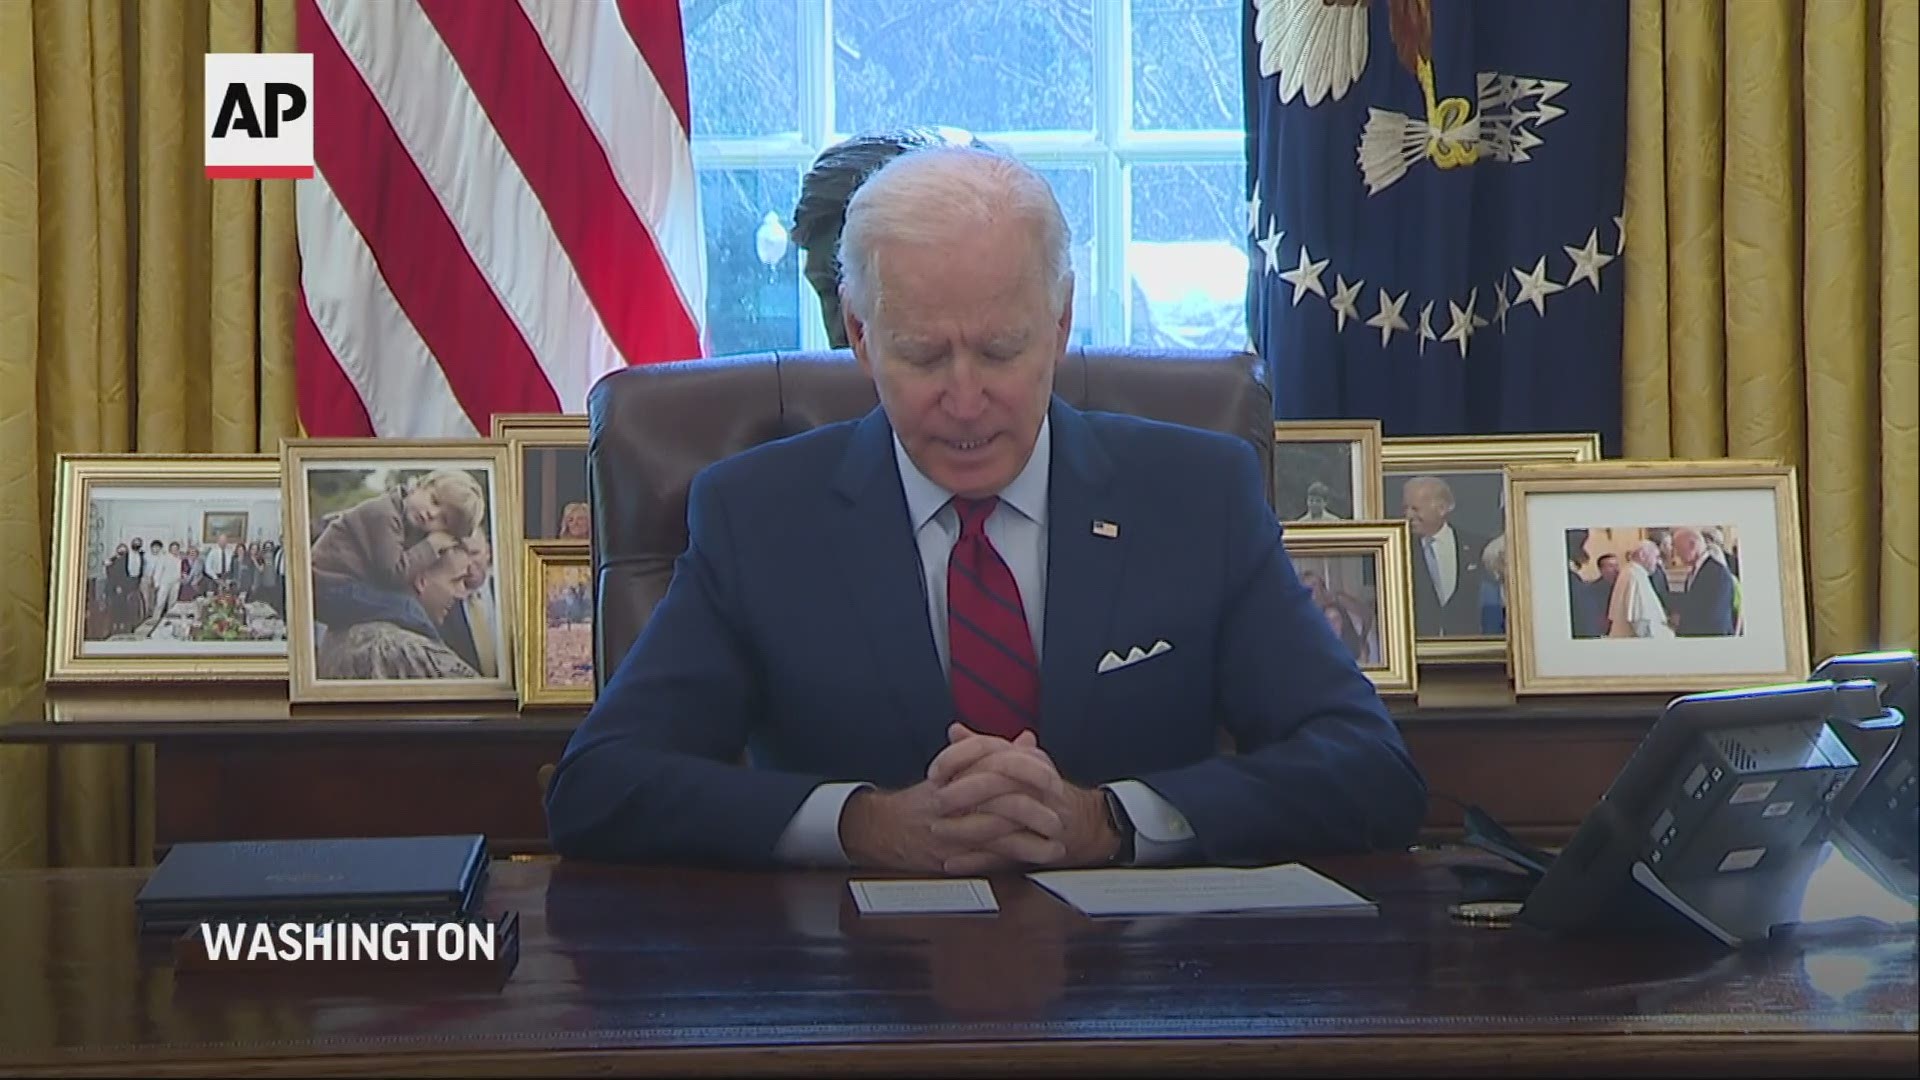 Biden signed directives Thursday on a range of issues including getting more Americans health insurance and rescinding a regulation barring U.S. aid for abortions.